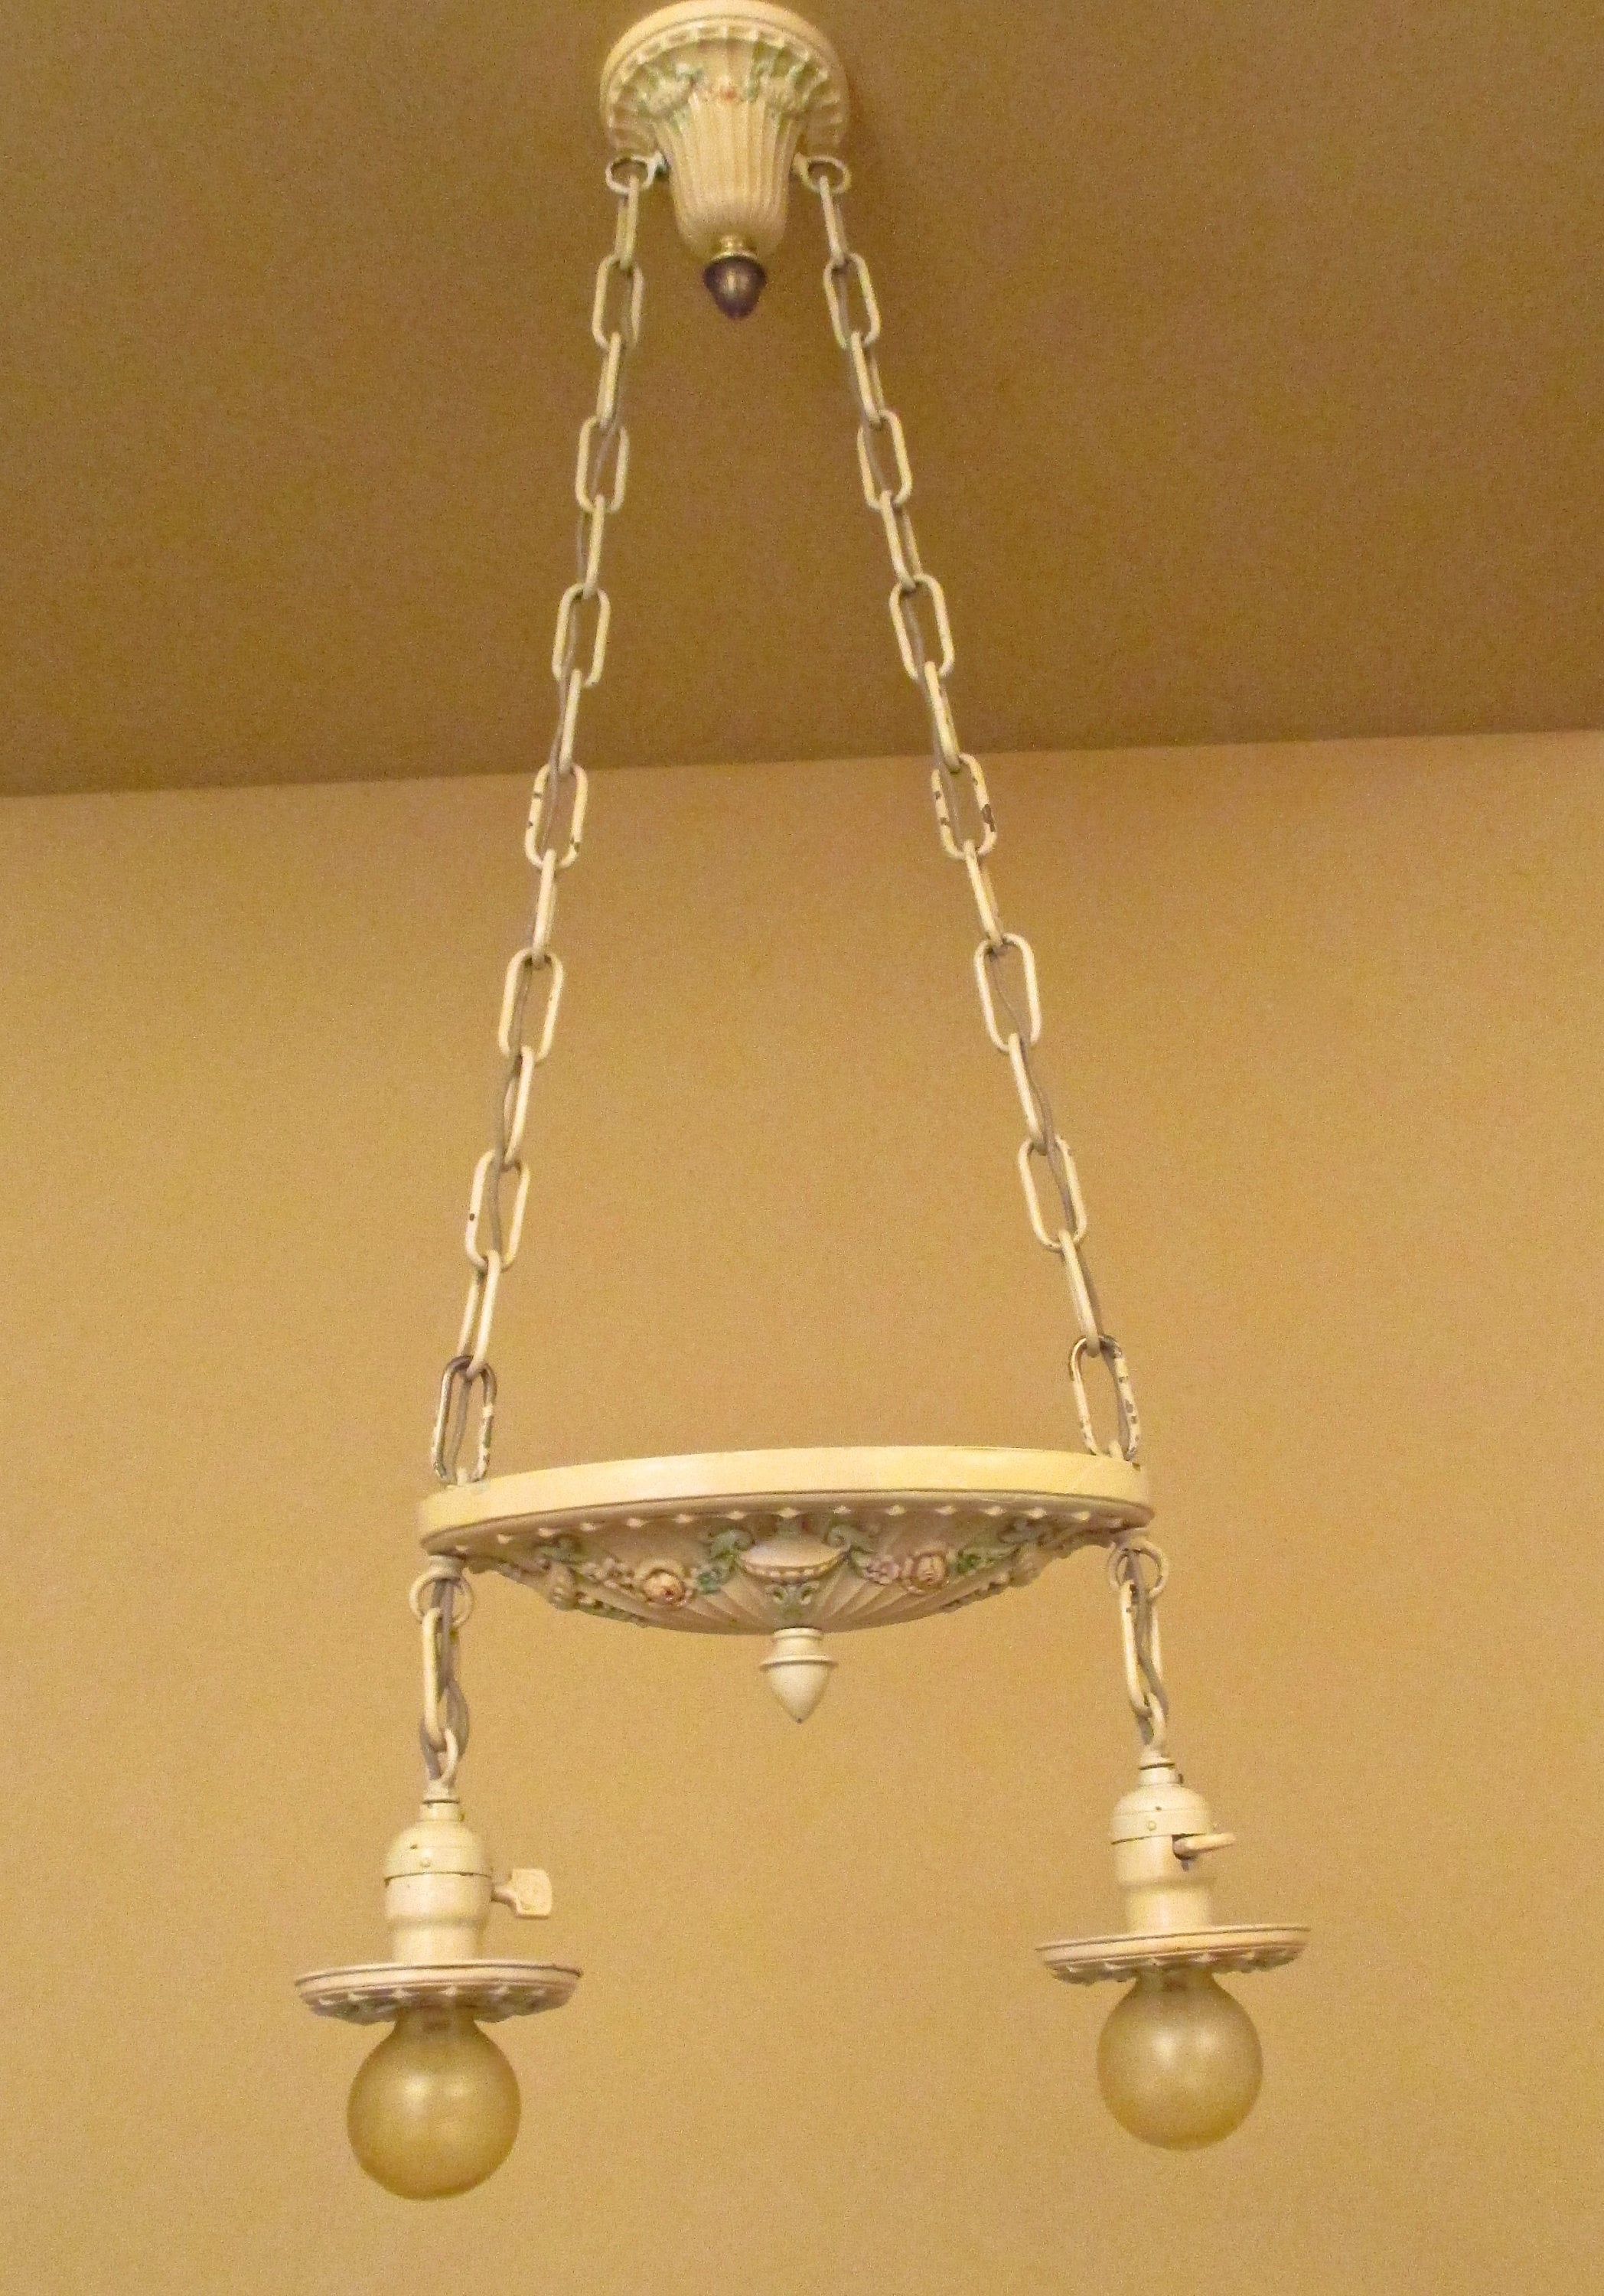 TWO sconces Rewired! ONE ceiling fixture Vintage Lights THREE 1920s bedroom fixtures